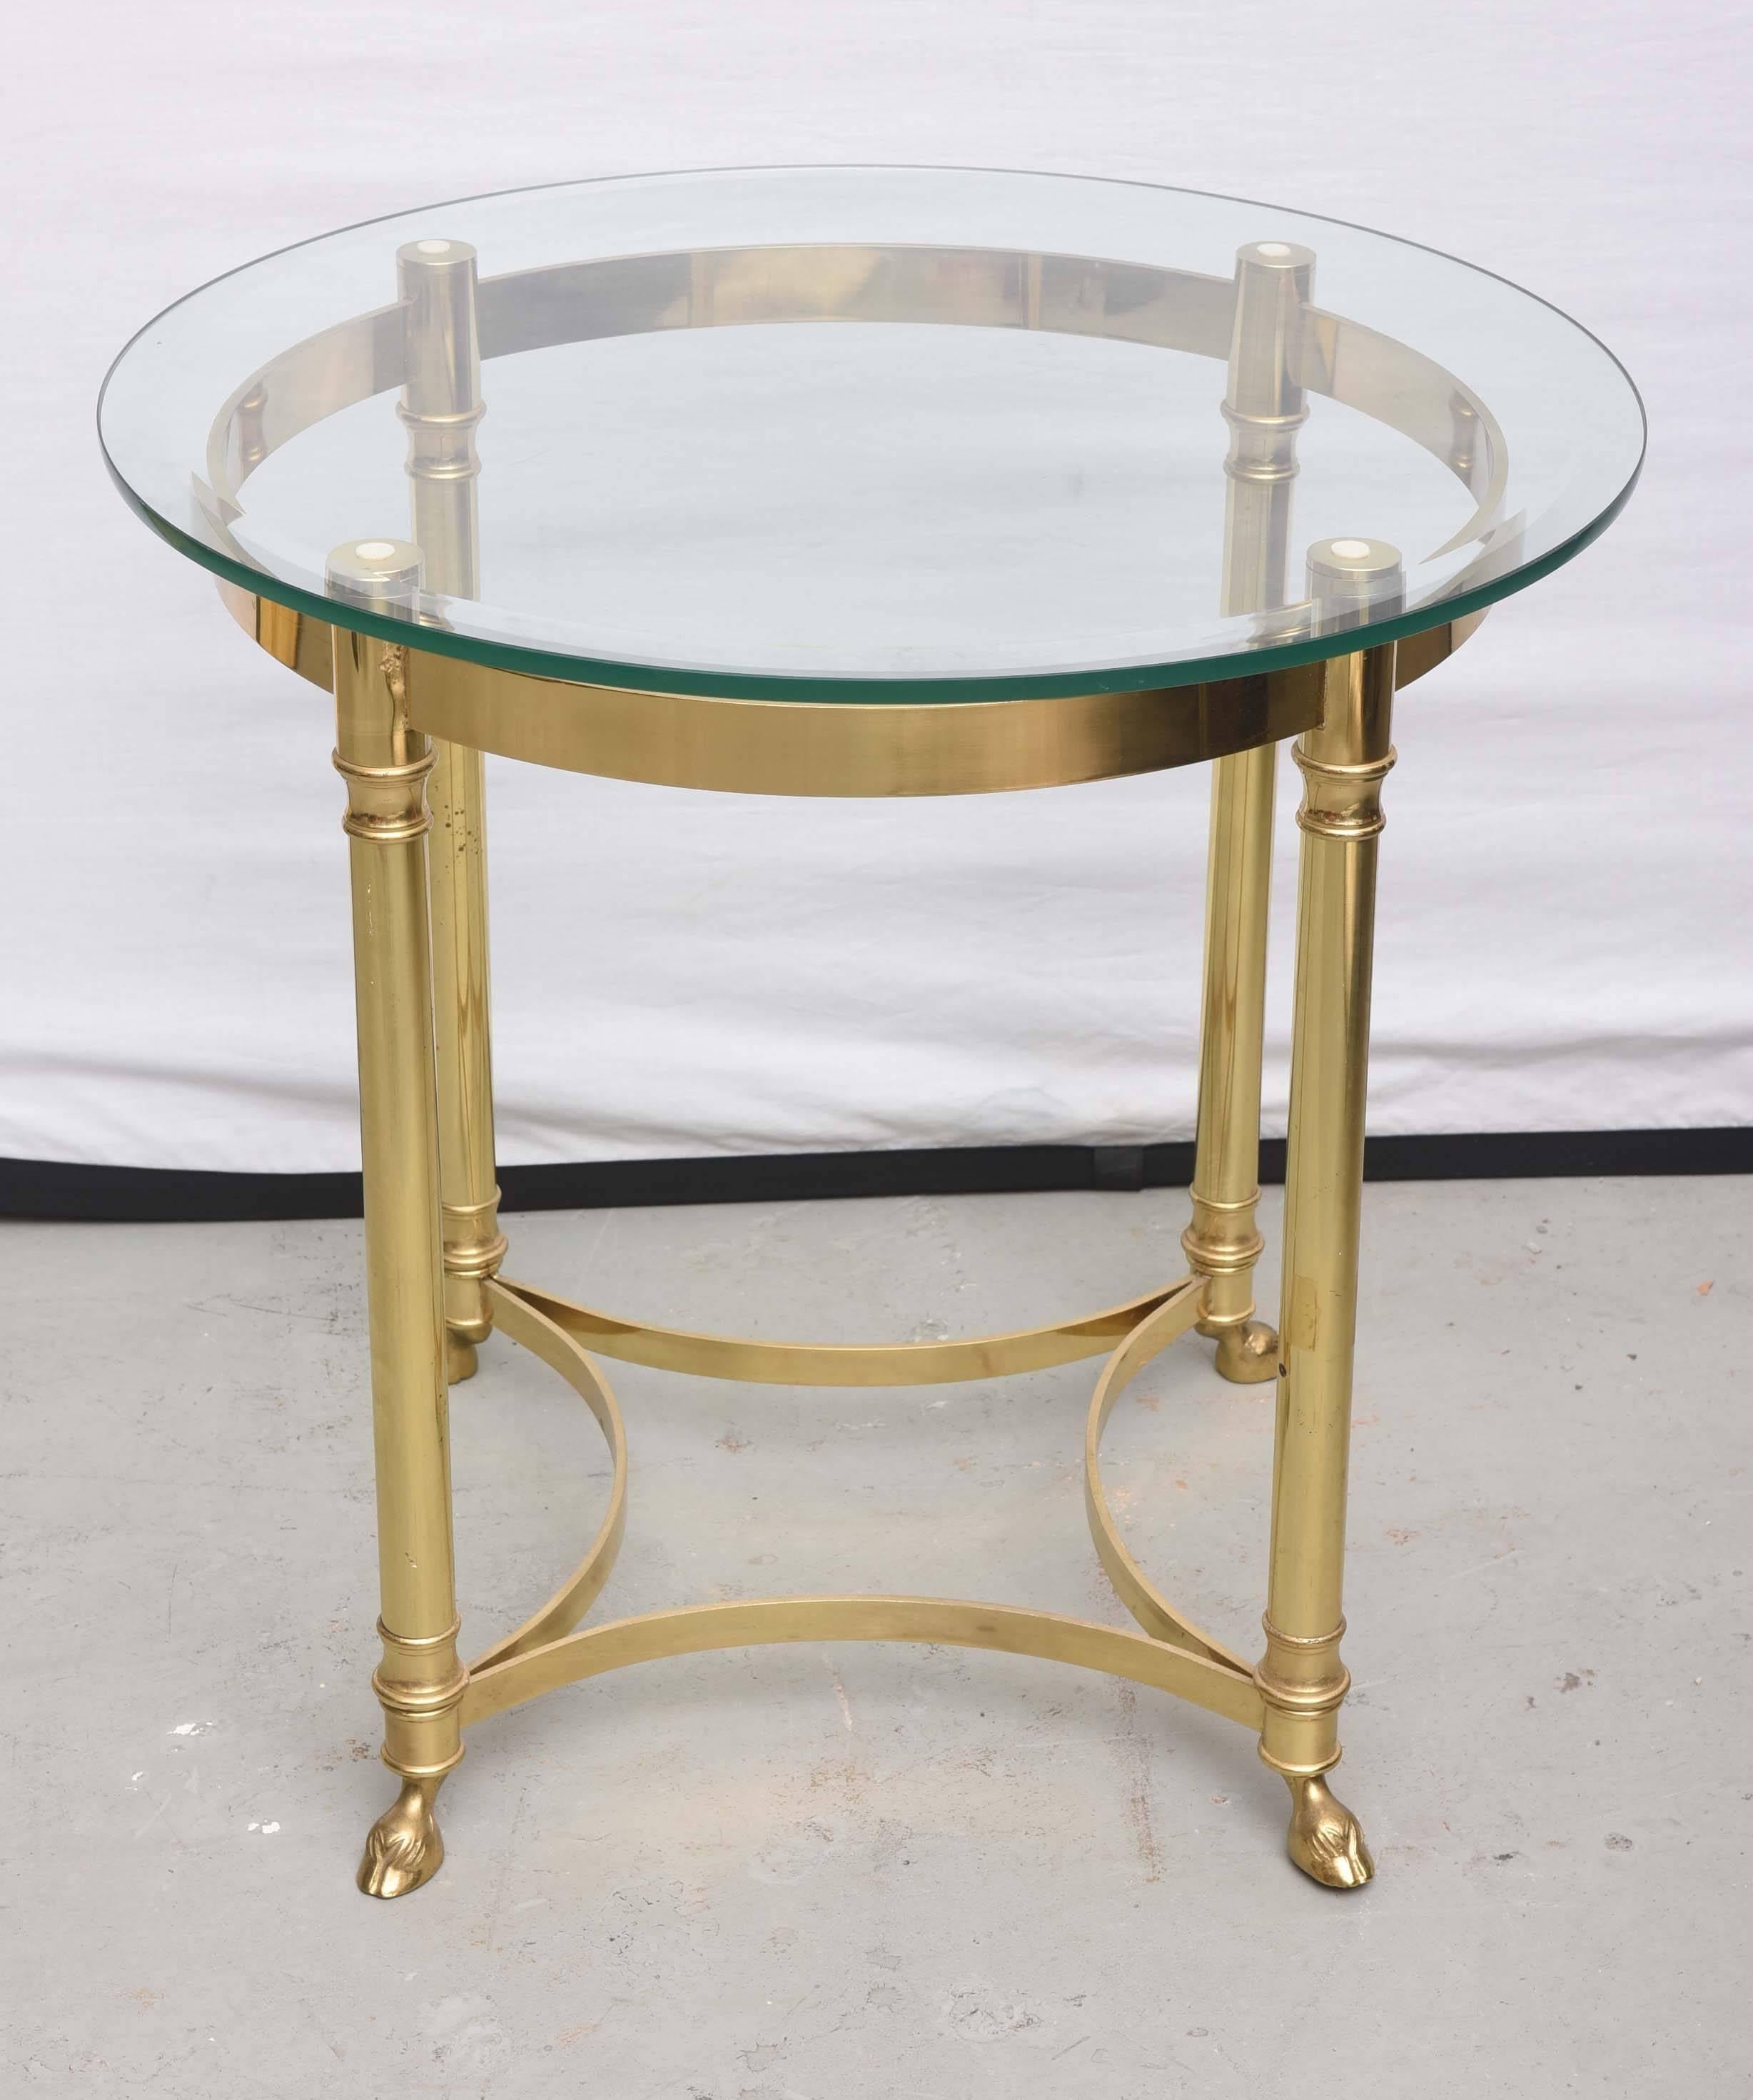 Perfect shape brass and glass round end table by La Barge.